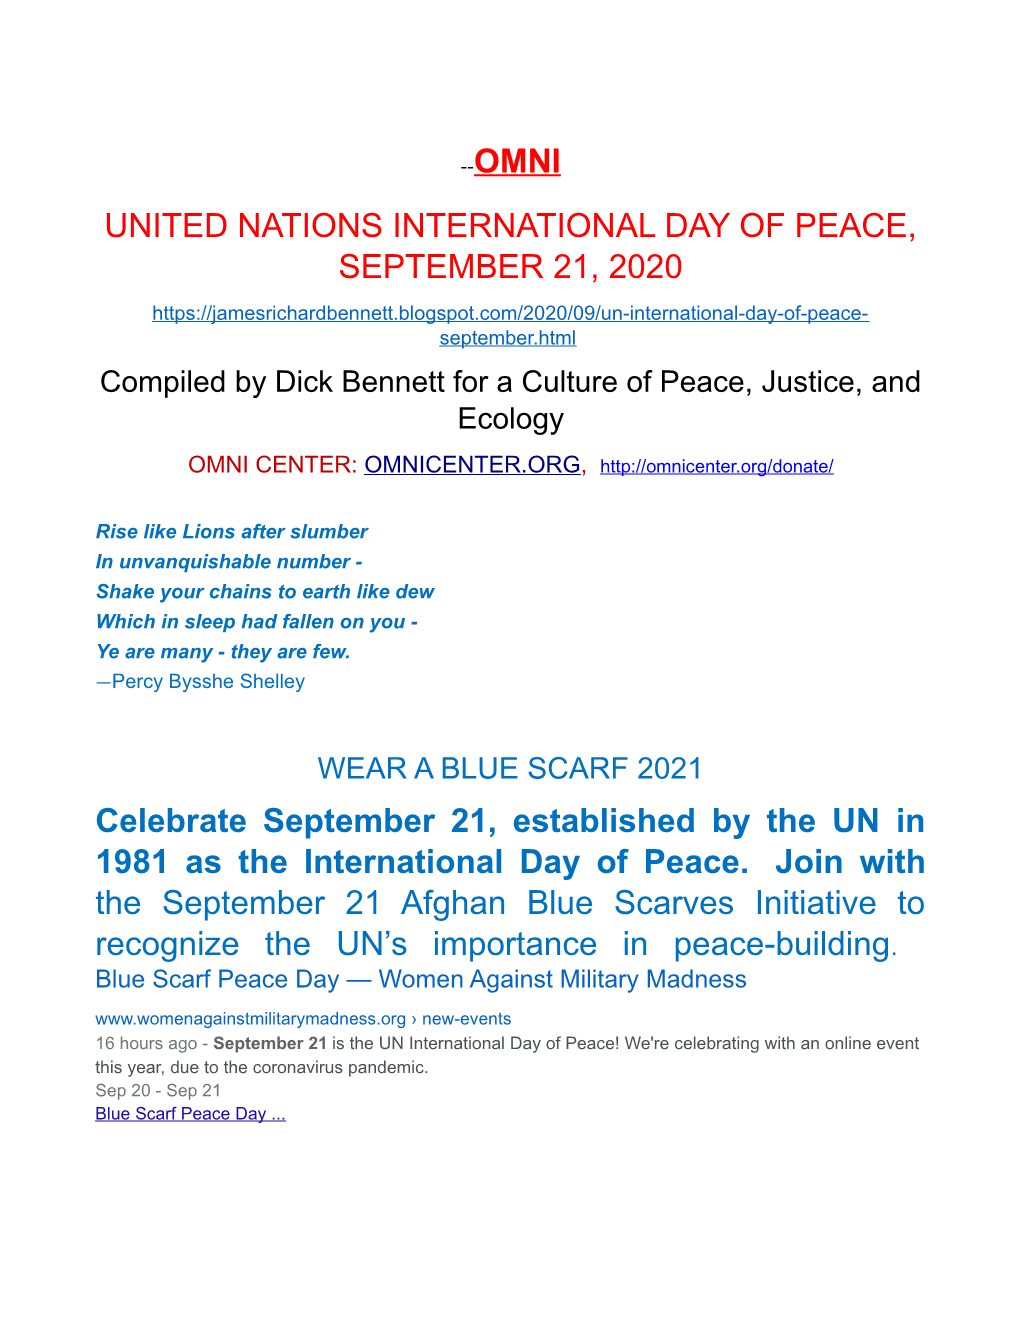 United Nations International Day of Peace, September 21